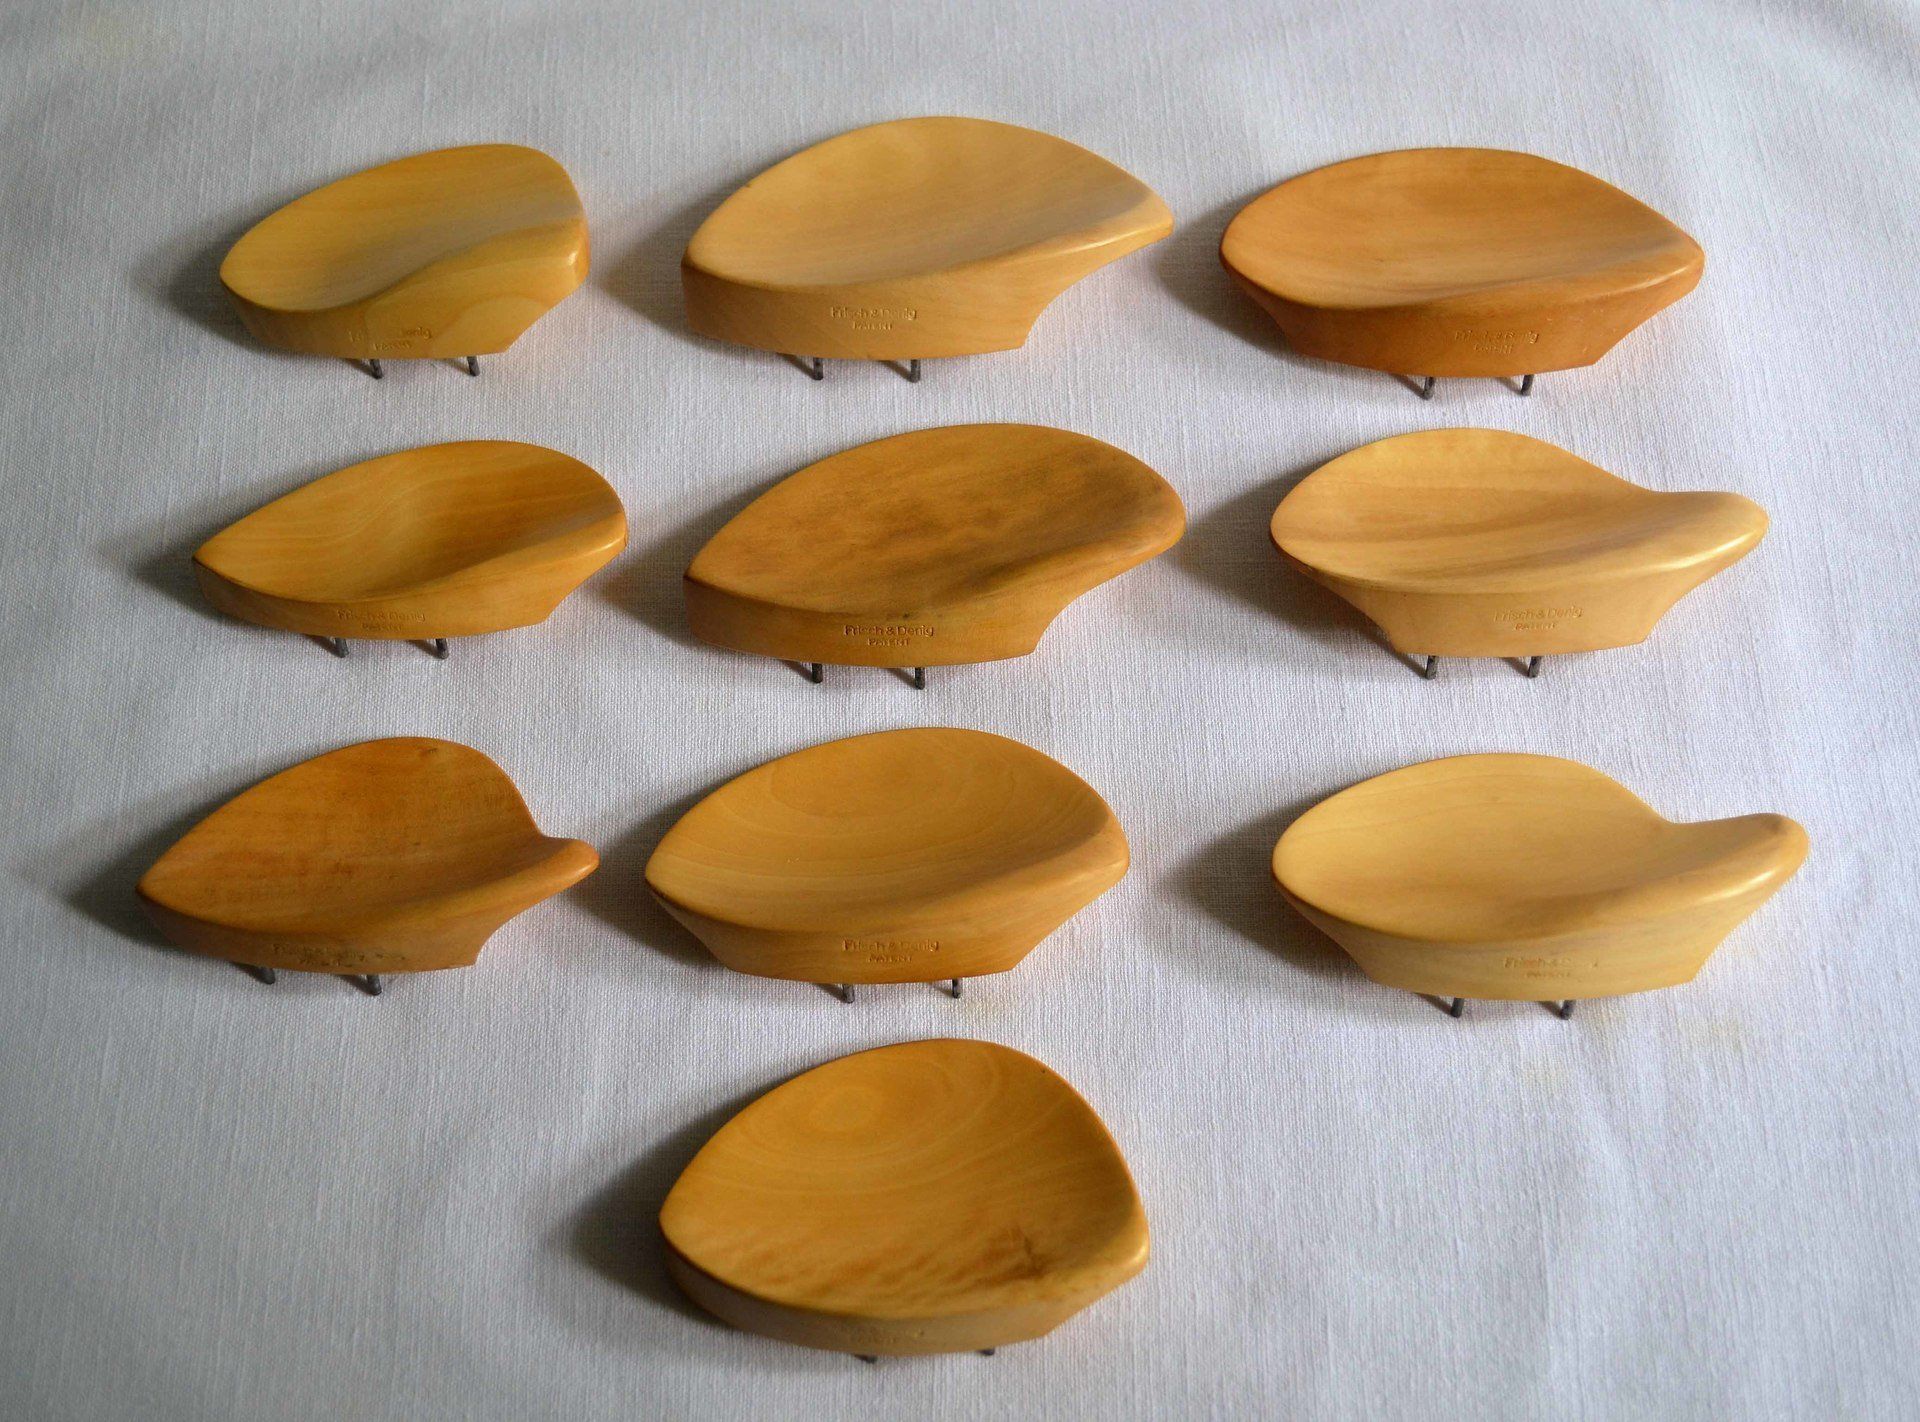 Chinrest shapes for every jaw shape